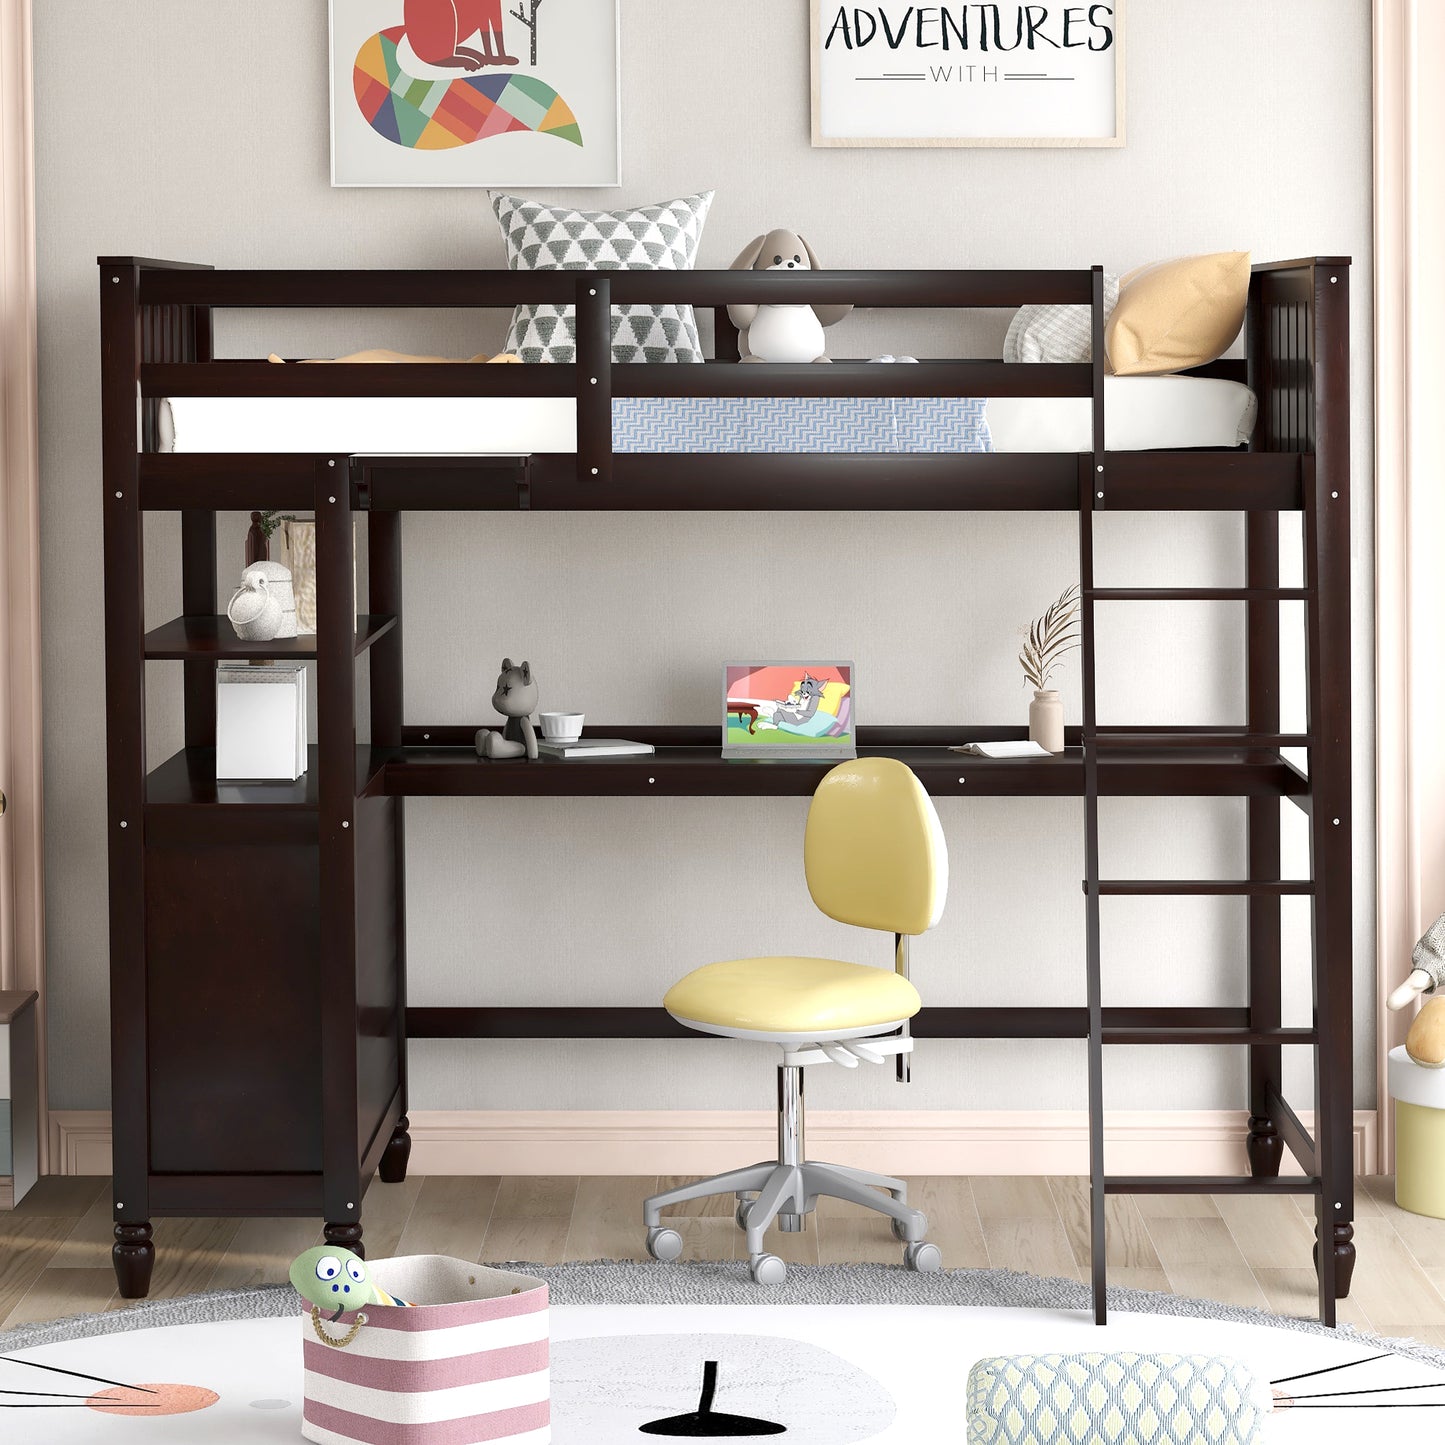 Twin size Loft Bed with Drawers and Desk, Wooden Loft Bed with Shelves - Espresso